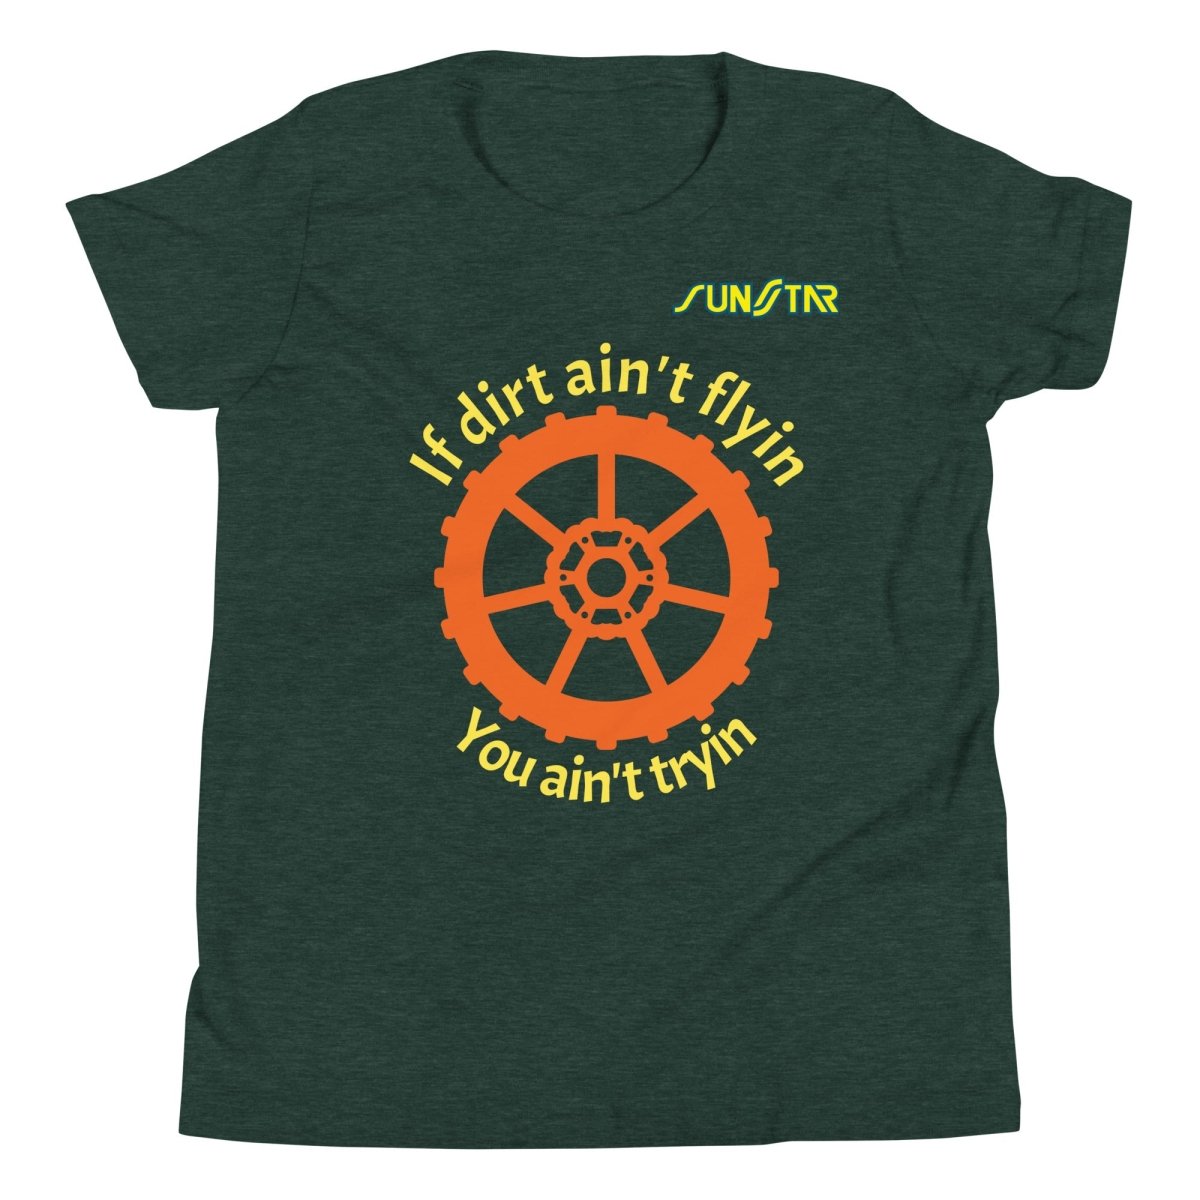 5415051_9595-Sunstar Sprockets and Chains-Youth Flyin' T-Shirt